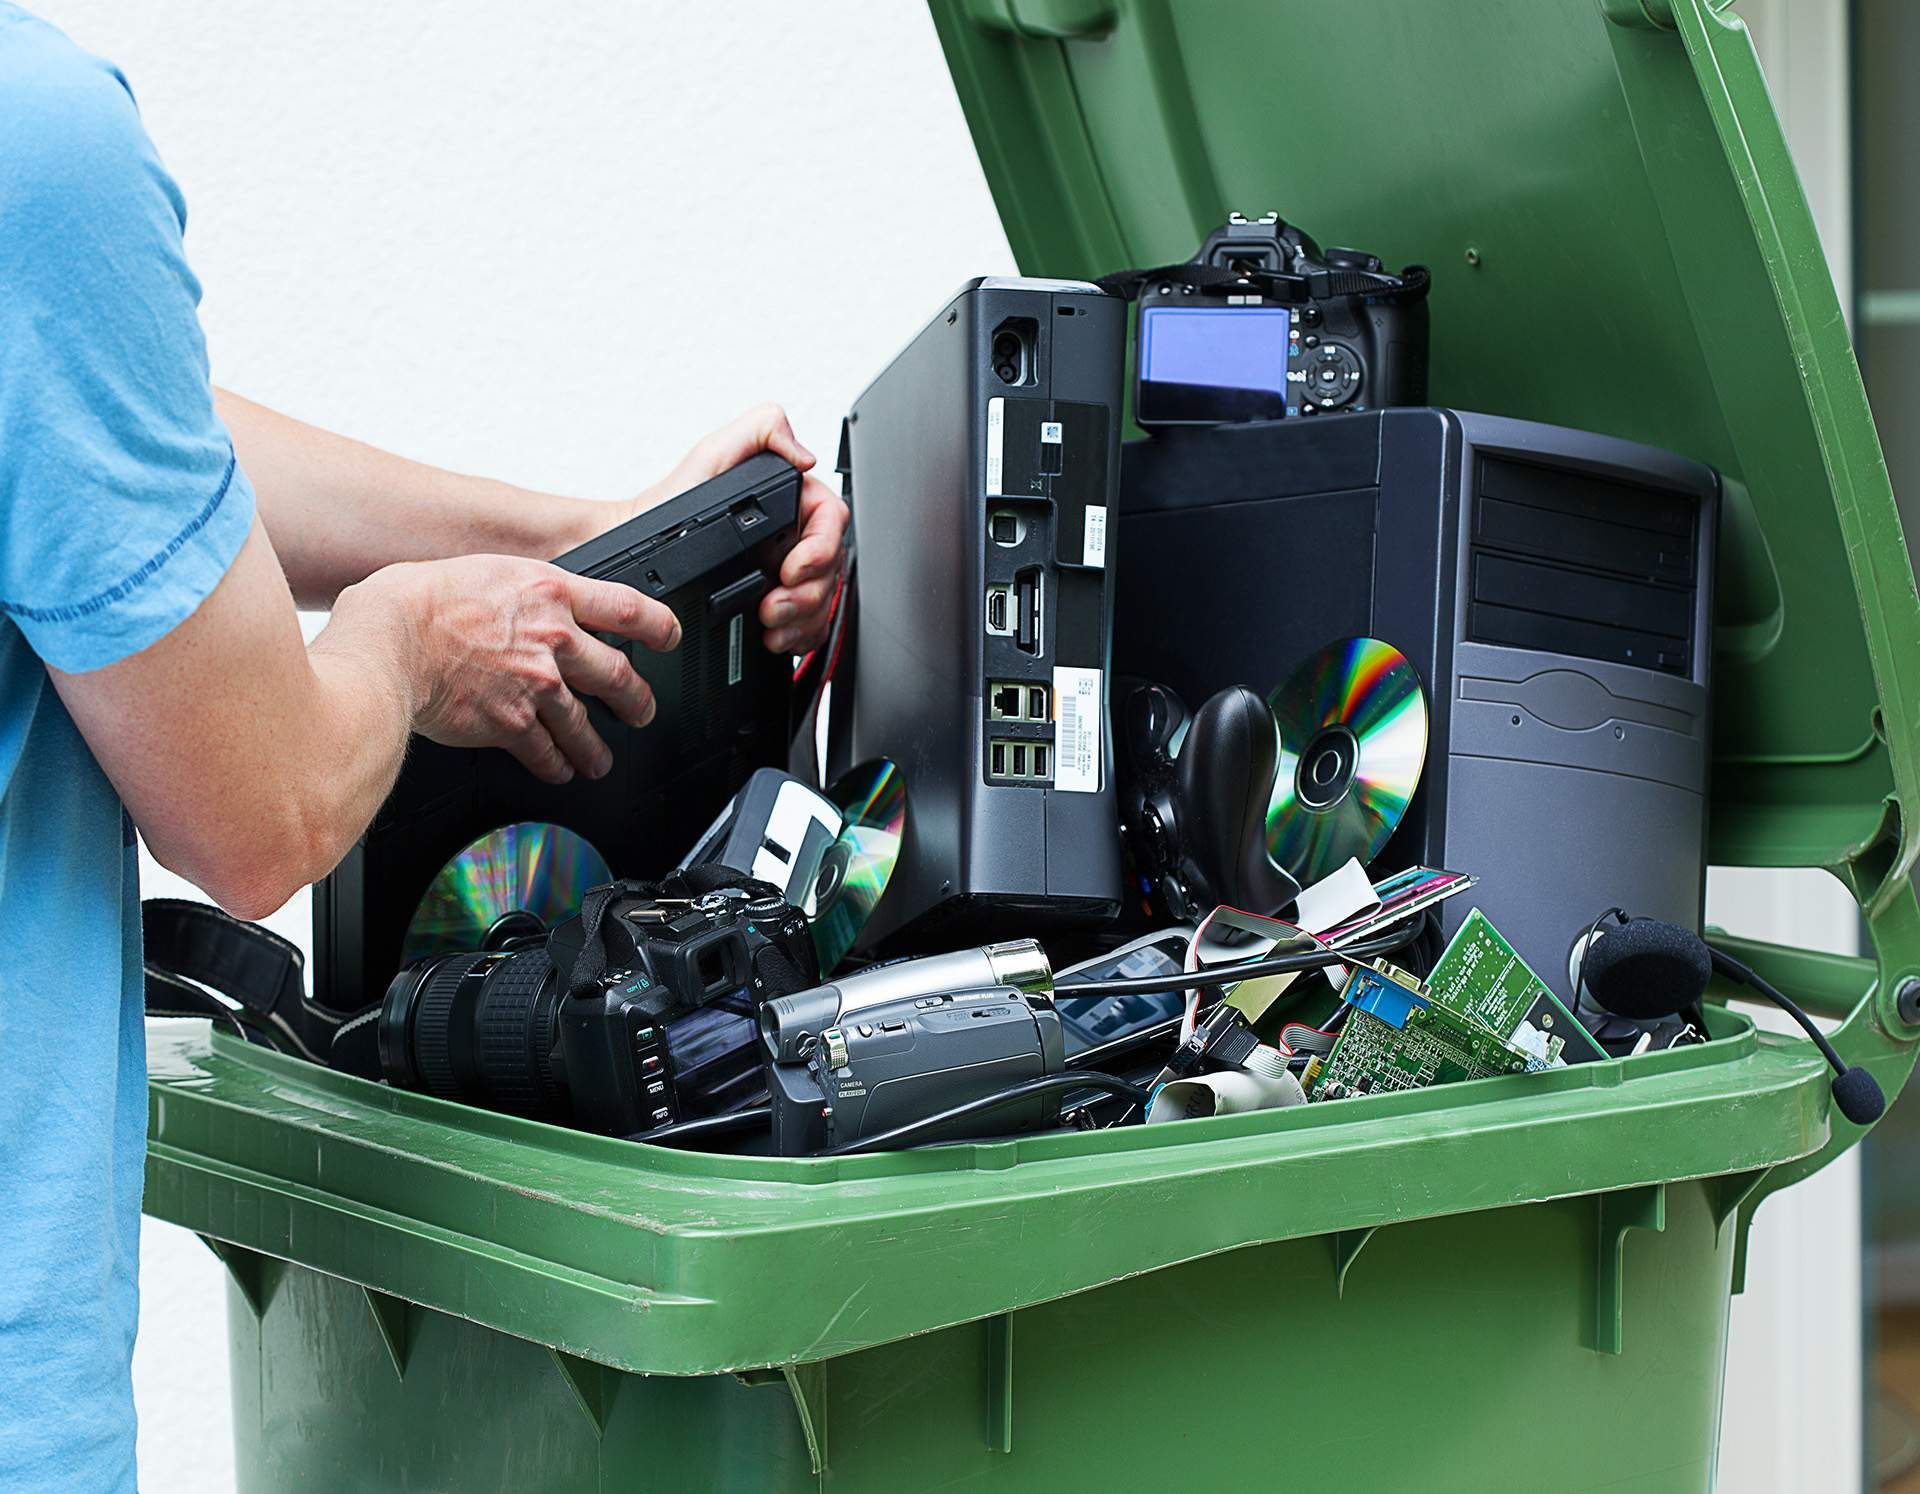 Electronic & Appliance Recycling for Businesses in Minnesota